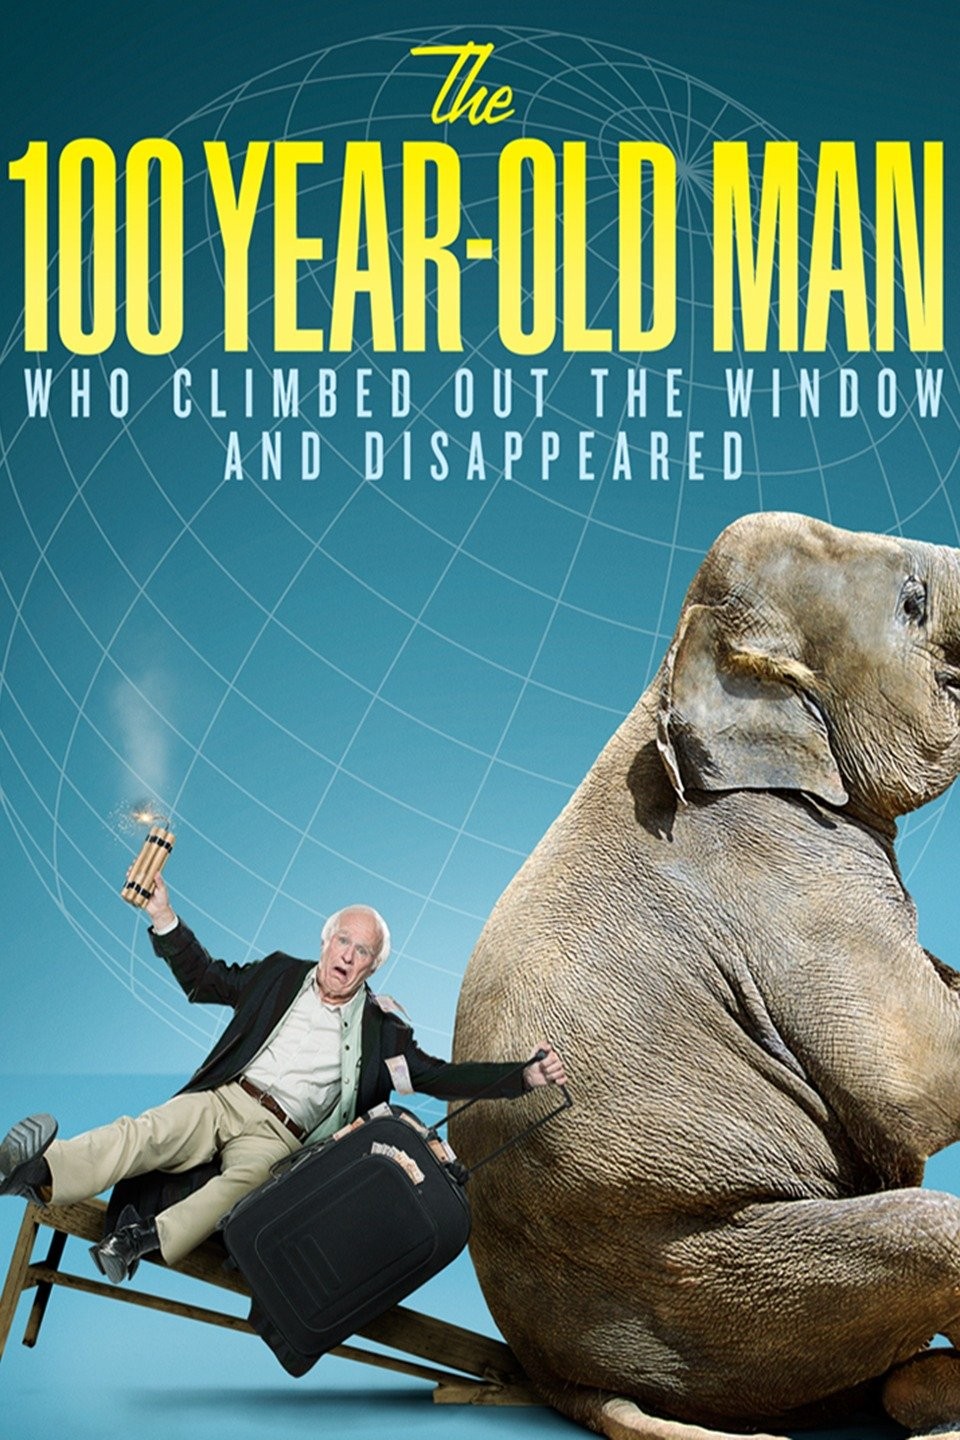 The 100-Year-Old Man Who Climbed Out the Window and Disappeared, Oscars  Wiki